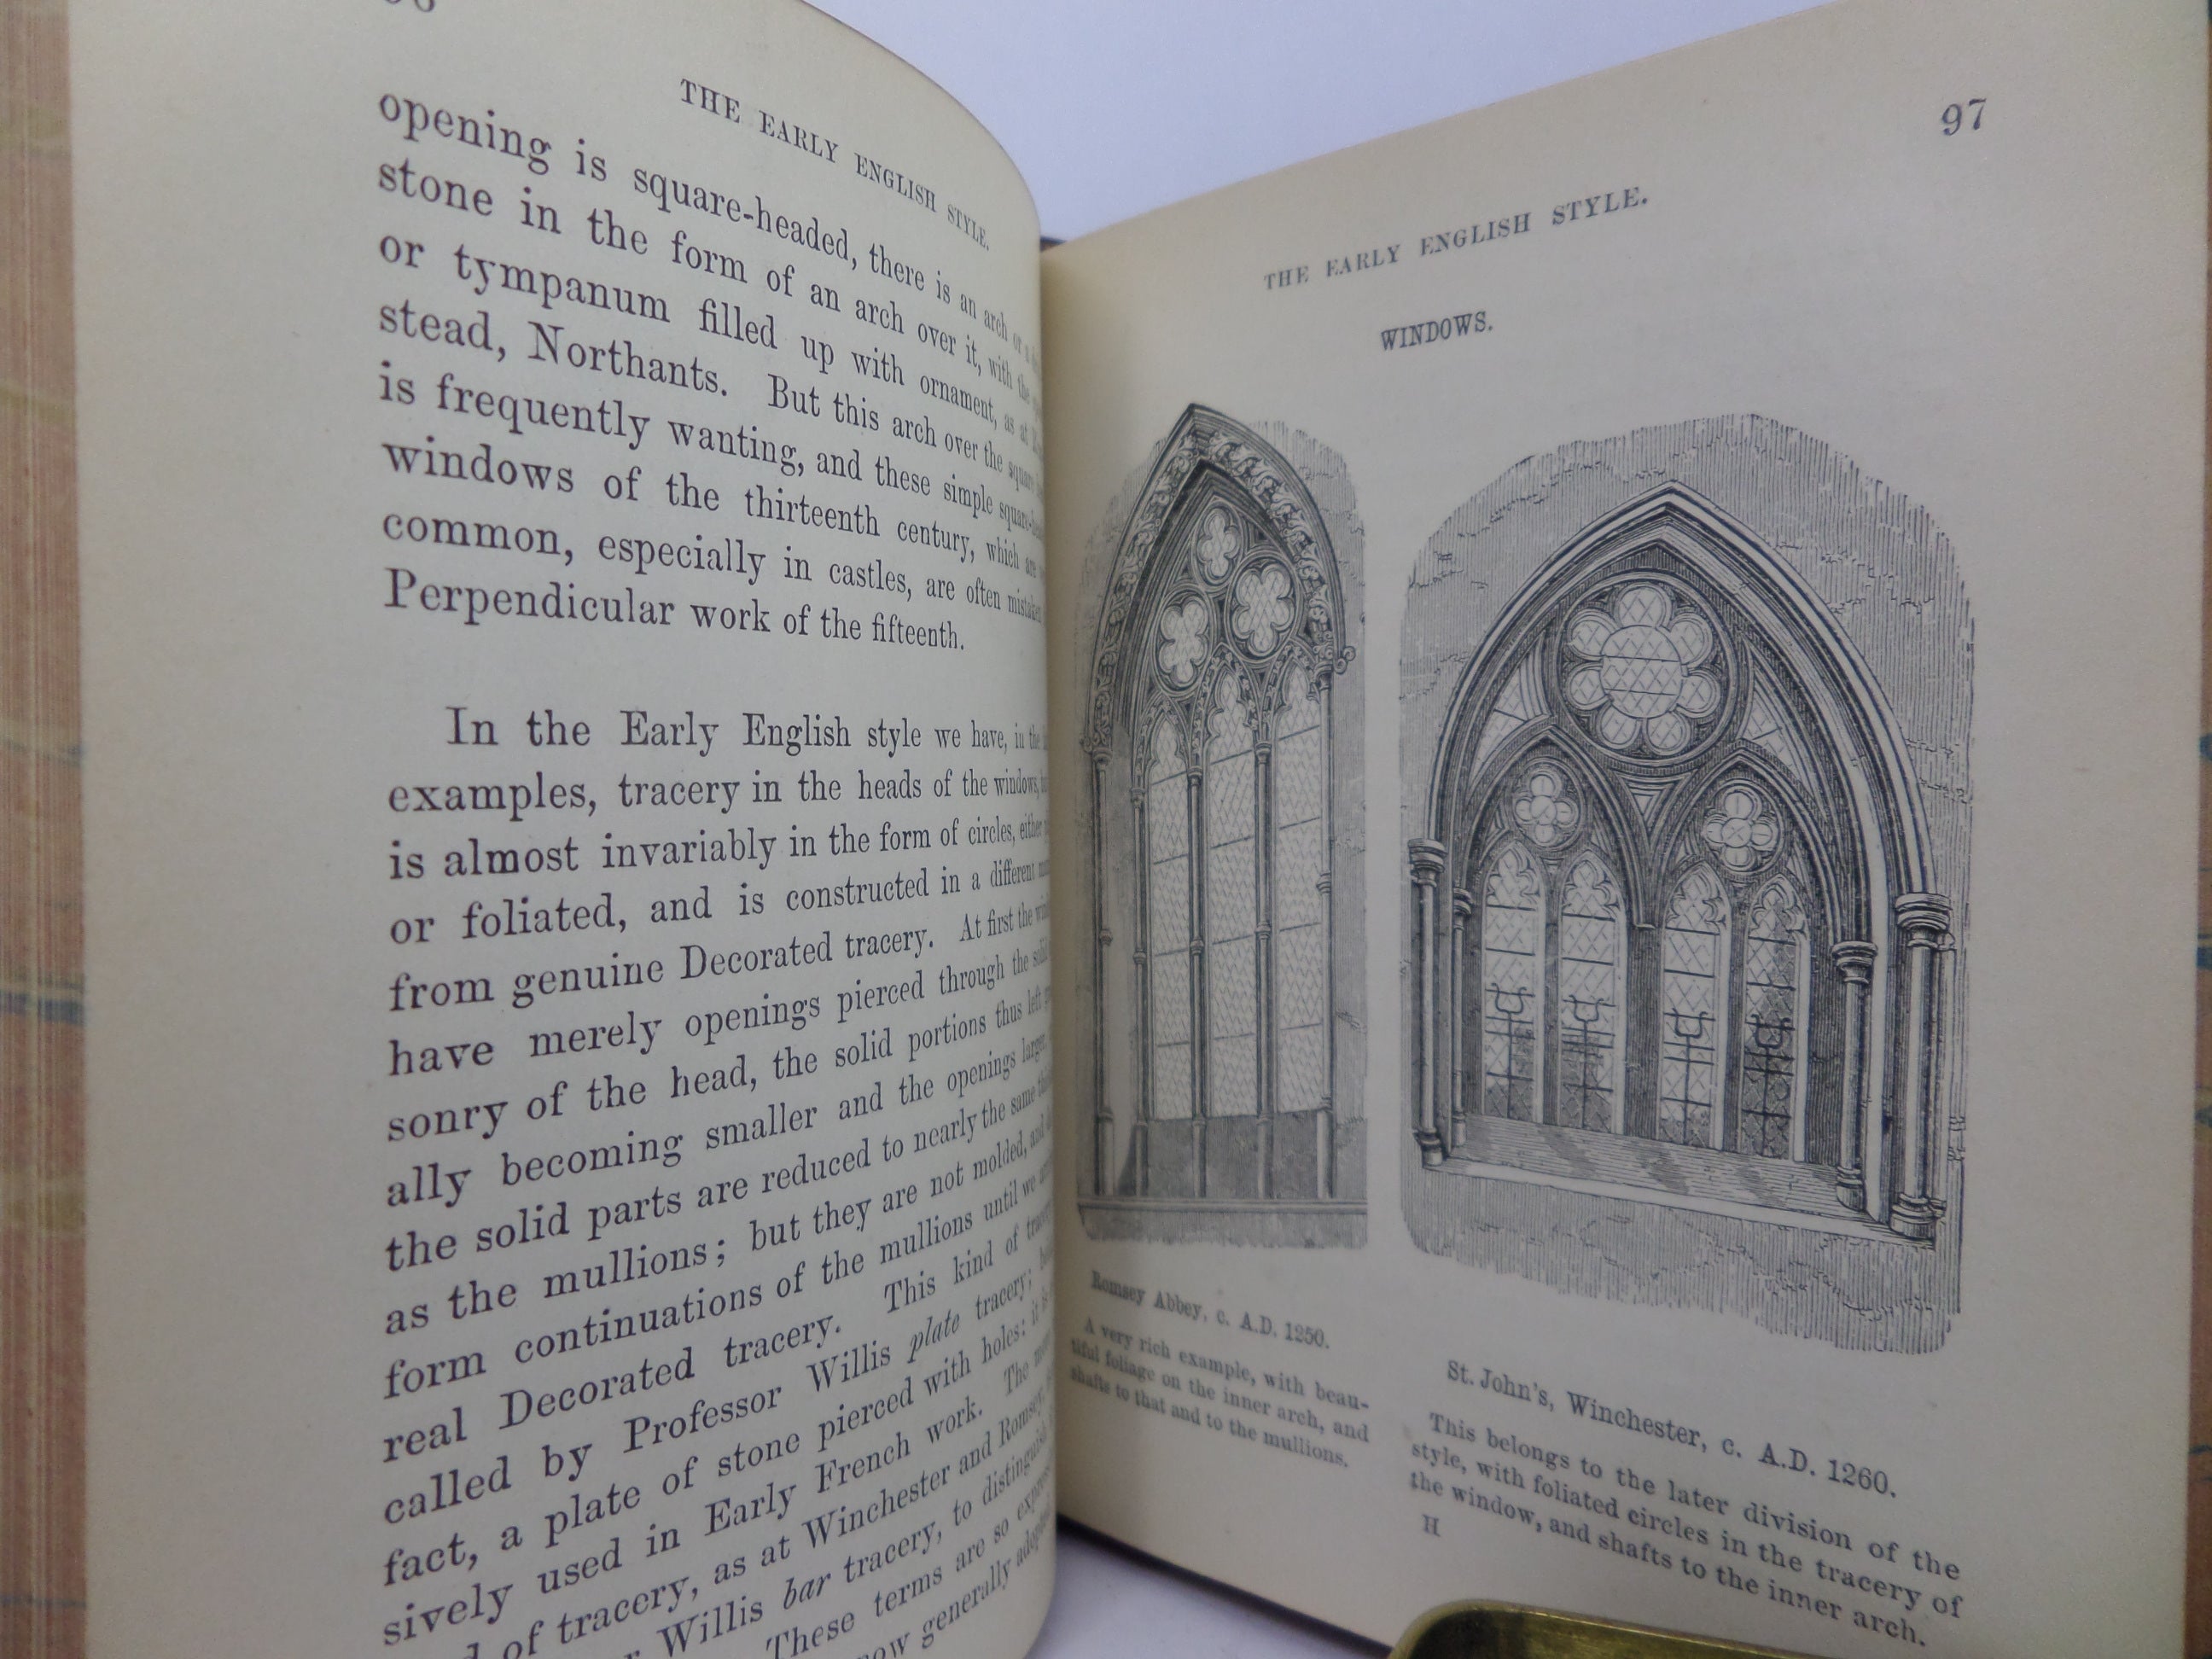 ABC OF GOTHIC ARCHITECTURE BY JOHN HENRY PARKER 1926 FINE LEATHER BINDING